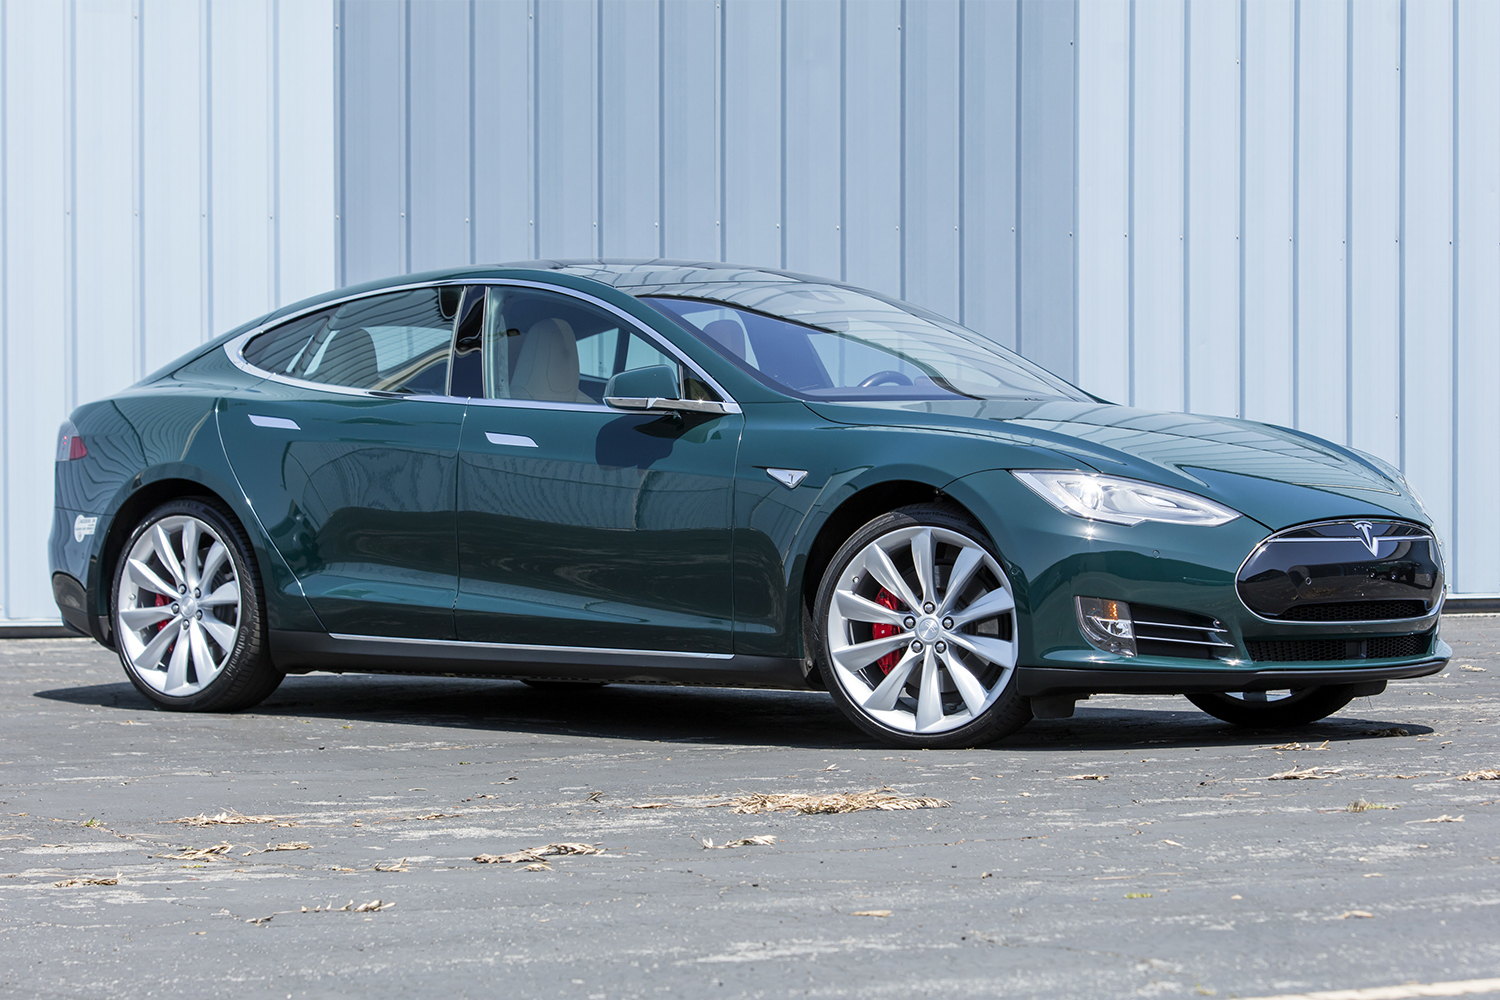 A 2015 Tesla Model S P85D owned by Tom Hanks. The electric vehicle will sell at the Bonhams Quail Lodge Auction as part of Monterey Car Week.